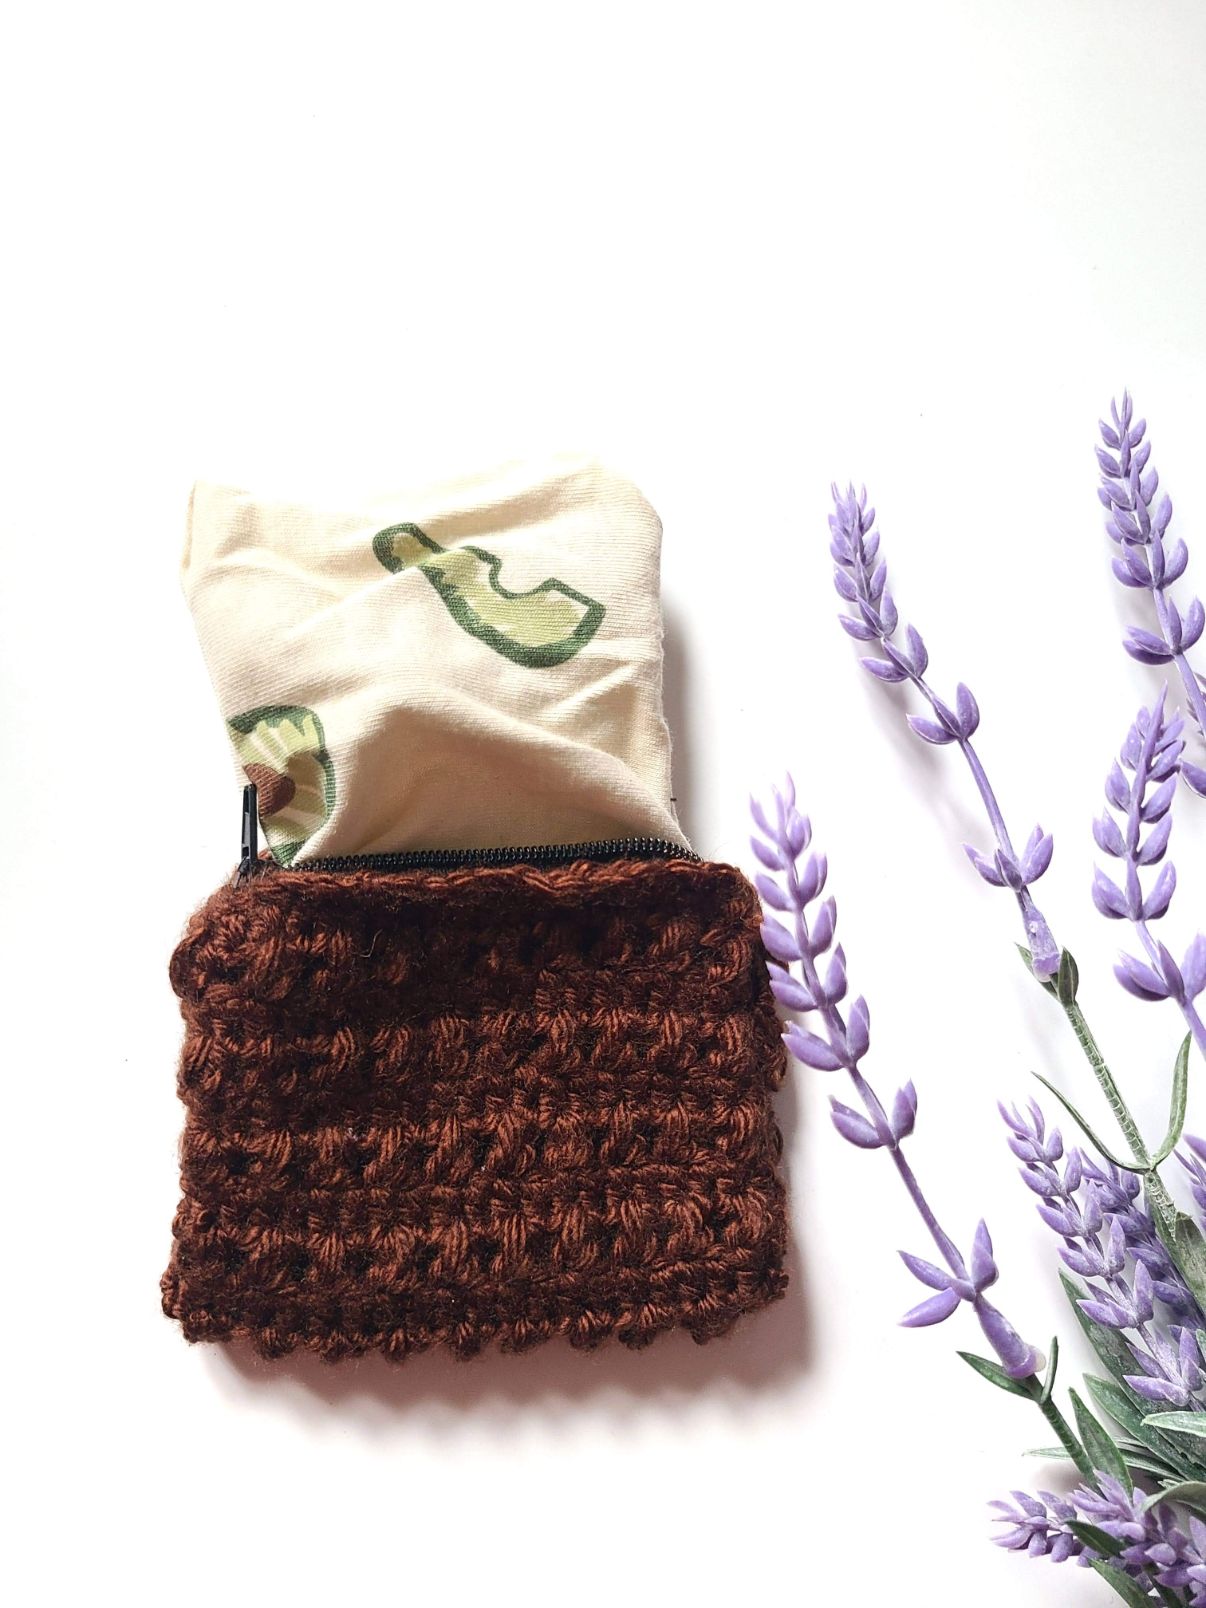 Brown change purse that is lined with avocado fabric